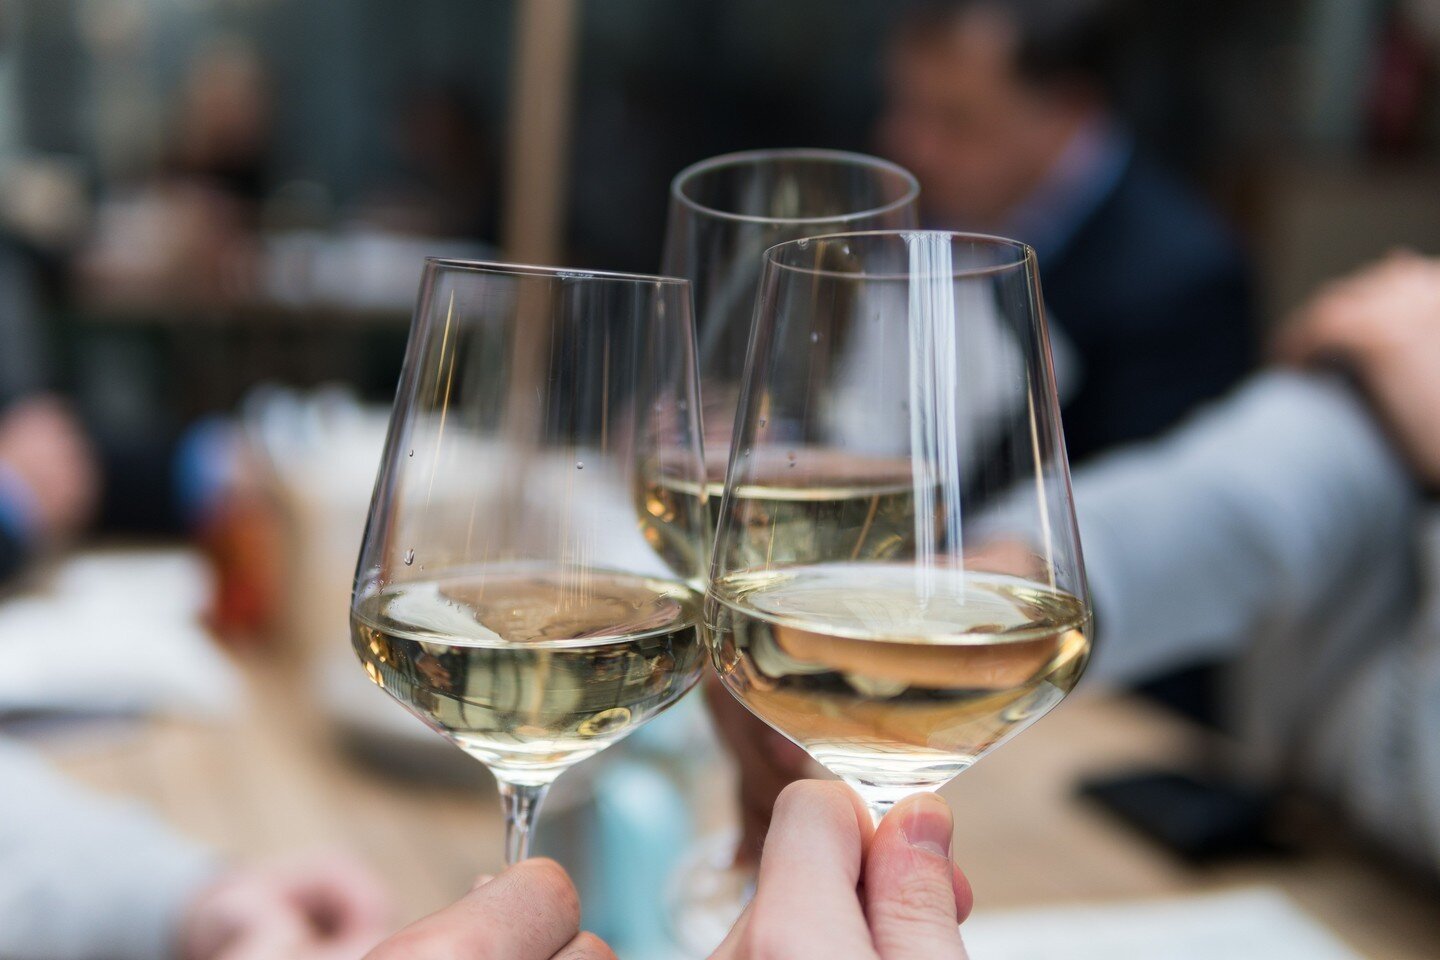 Take a sip and learn something new. Curious about the finest flavors of Texas? We can help with that. 
-
#wine #locallysourced #winecountry #texasfood #winetasting #vinyard #fall #winelover #gourmetparadise #culinarytalents #finedining #chefsofinstag